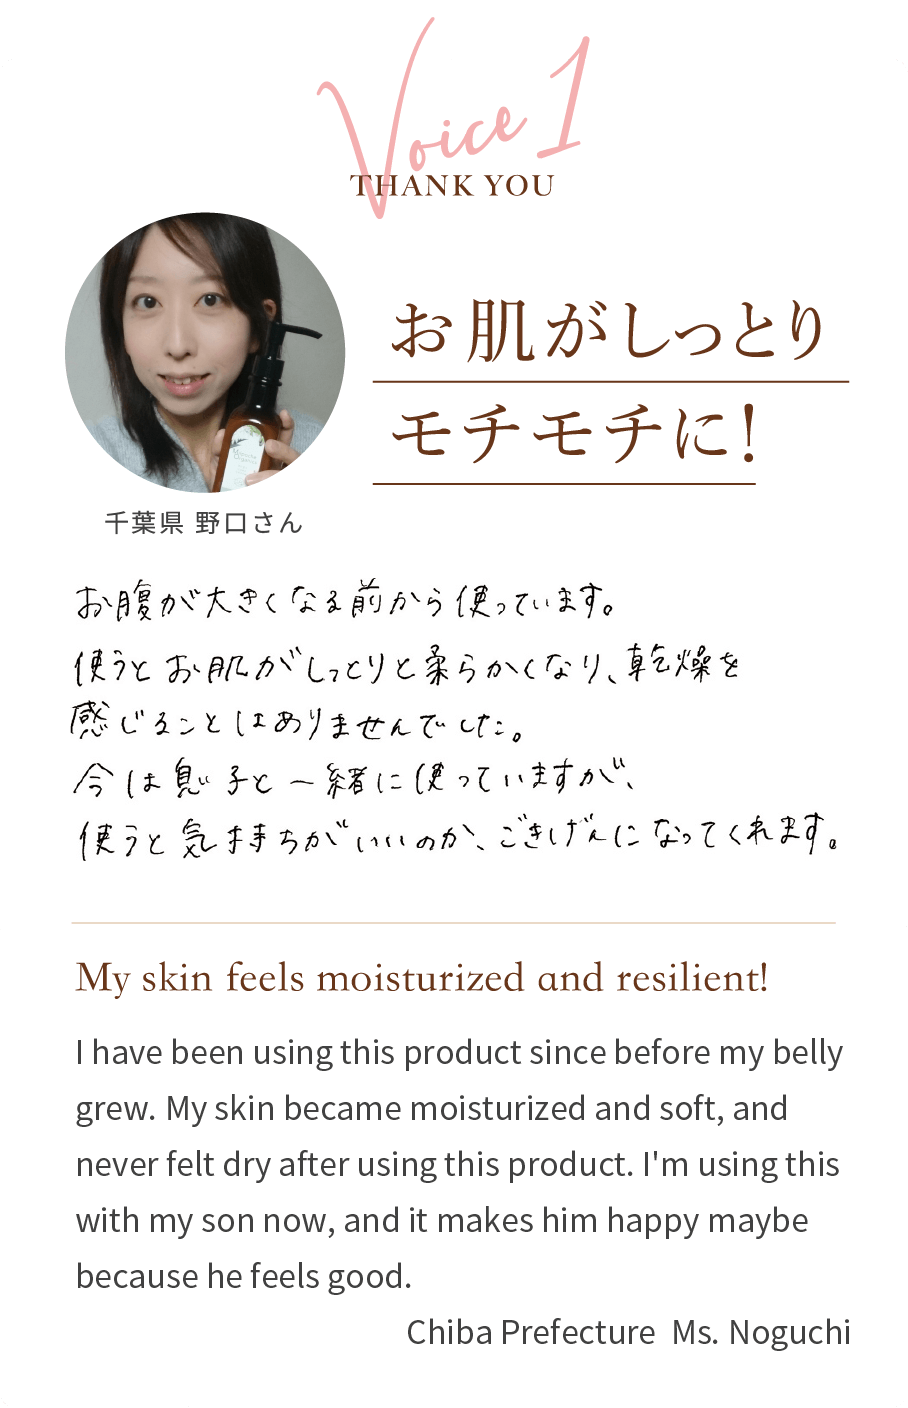 Voice1 Chiba Prefecture  Ms. Noguchi | My skin feels moisturized and resilient!